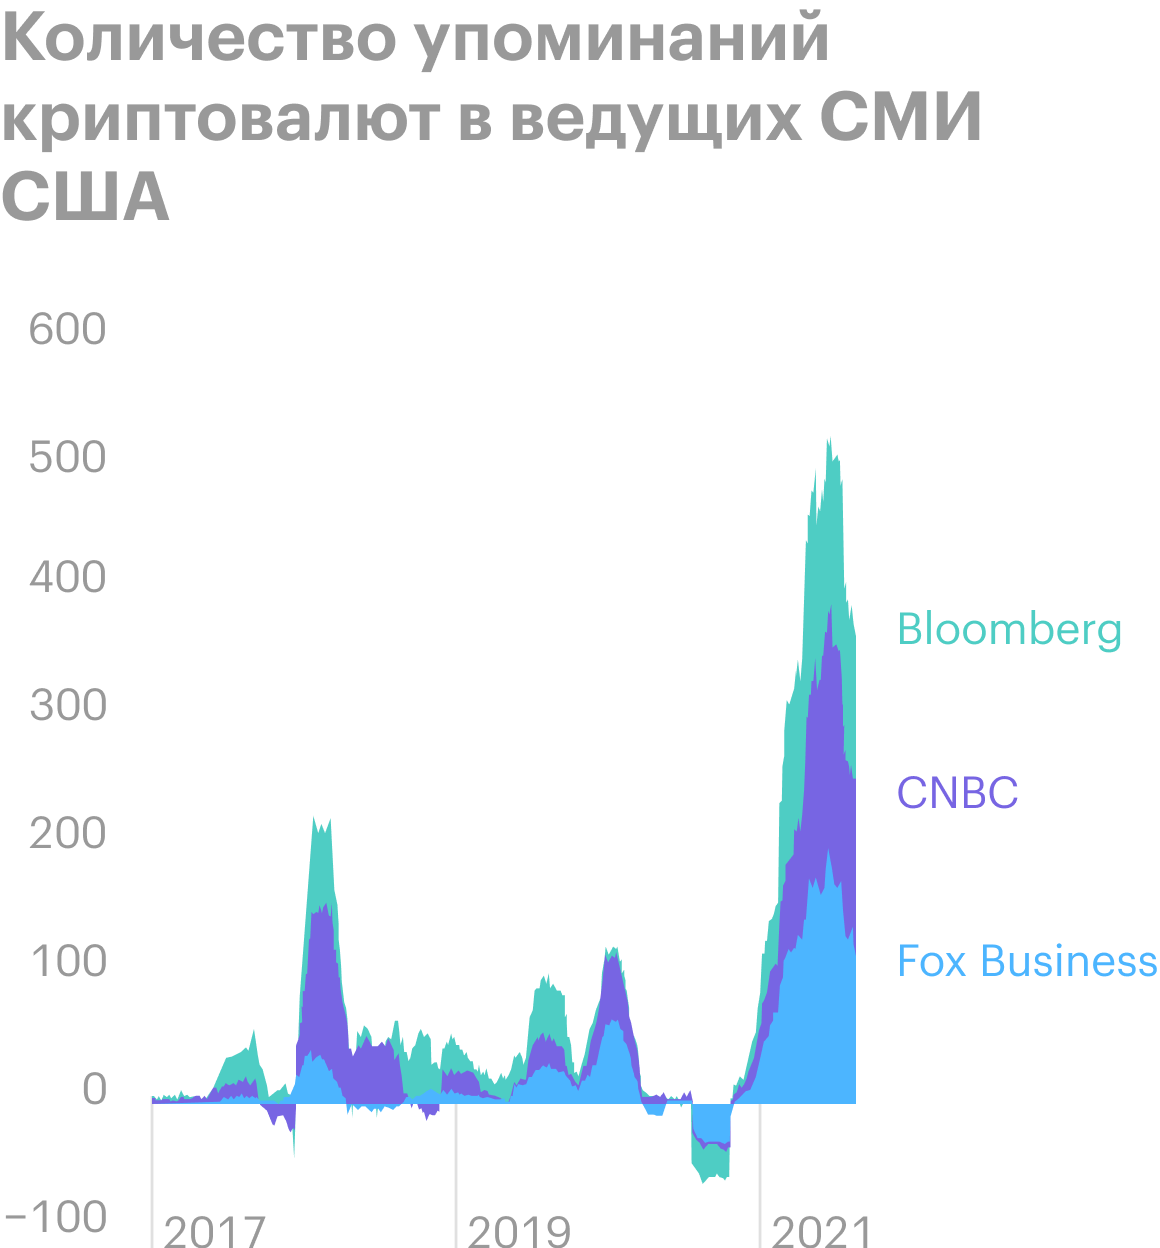 Источник: Daily Shot, Media coverage of crypto markets has been slowing